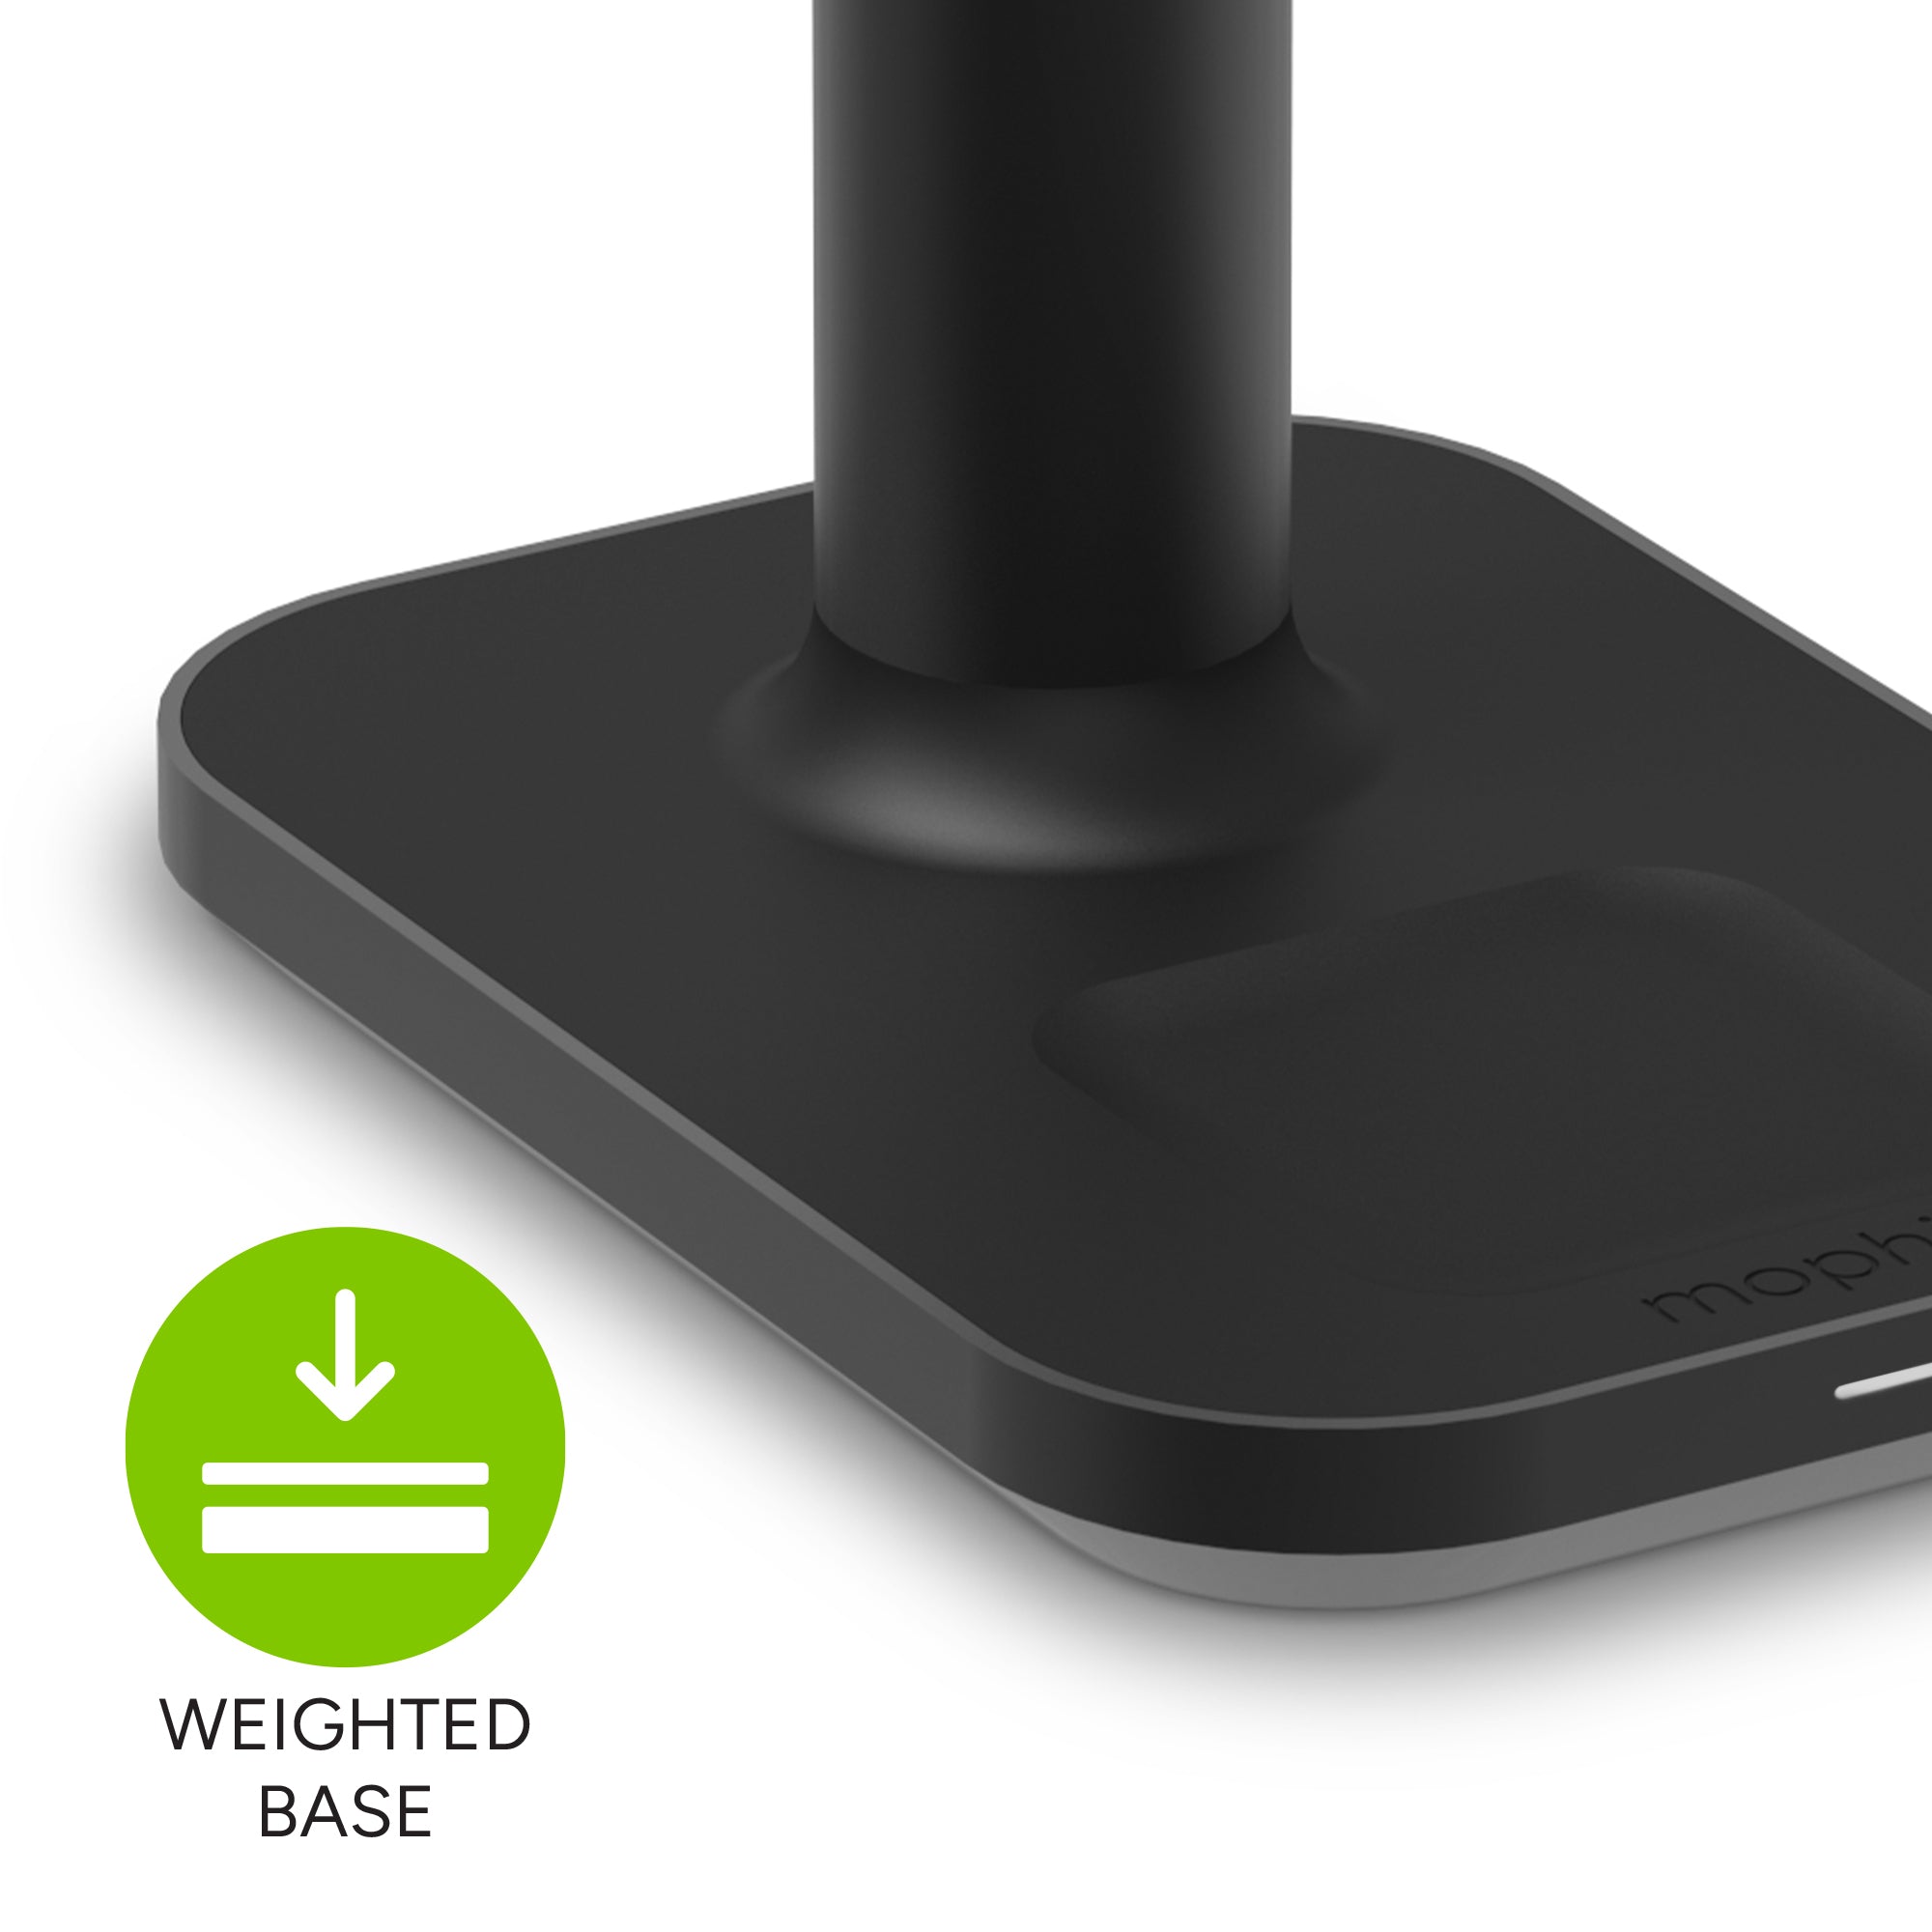 3-in-1 extendable stand with MagSafe